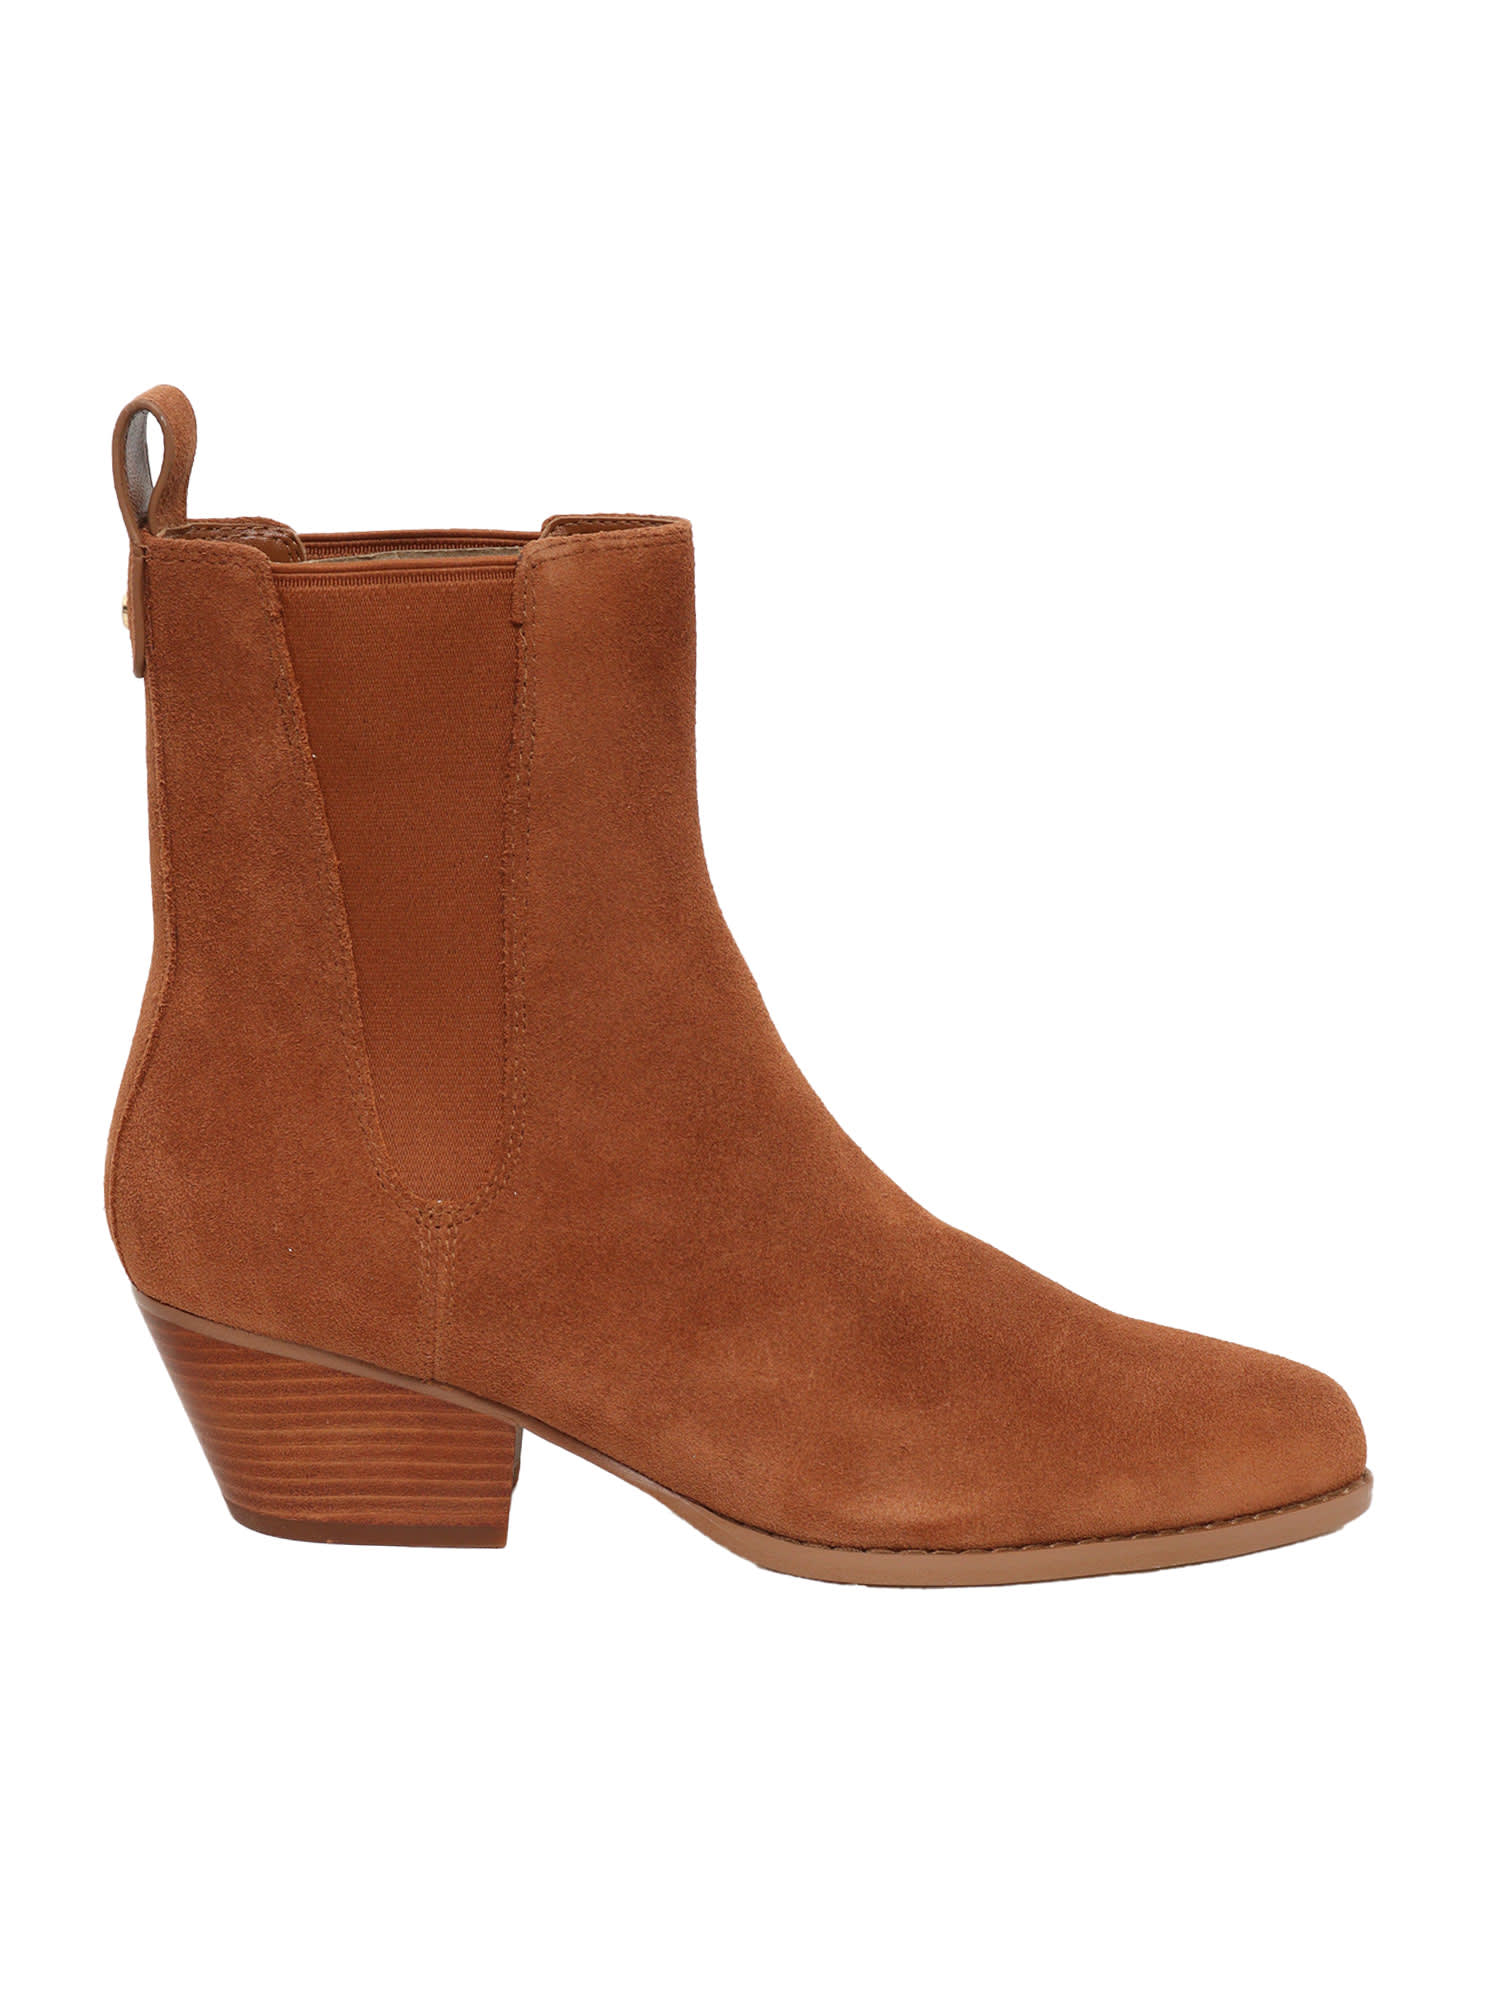 MICHAEL KORS KINLEE ANKLE BOOTS